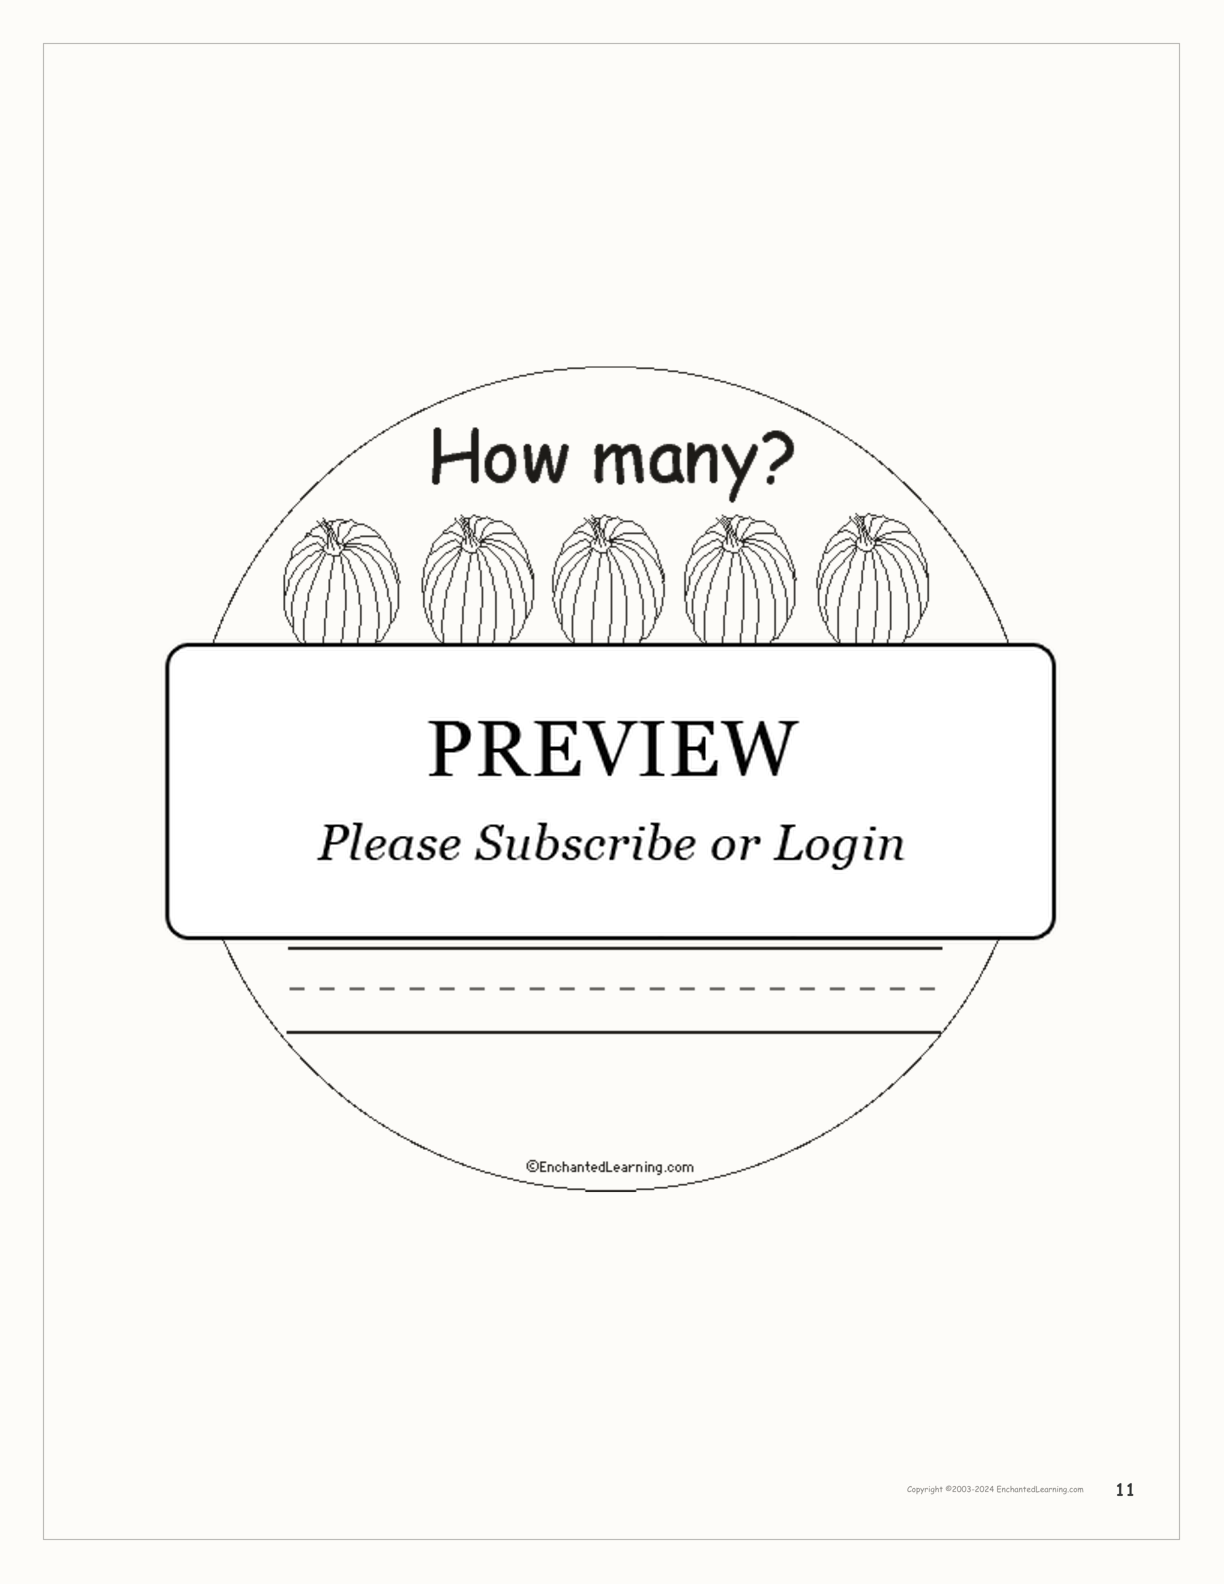 How Many Pumpkins? interactive printout page 11